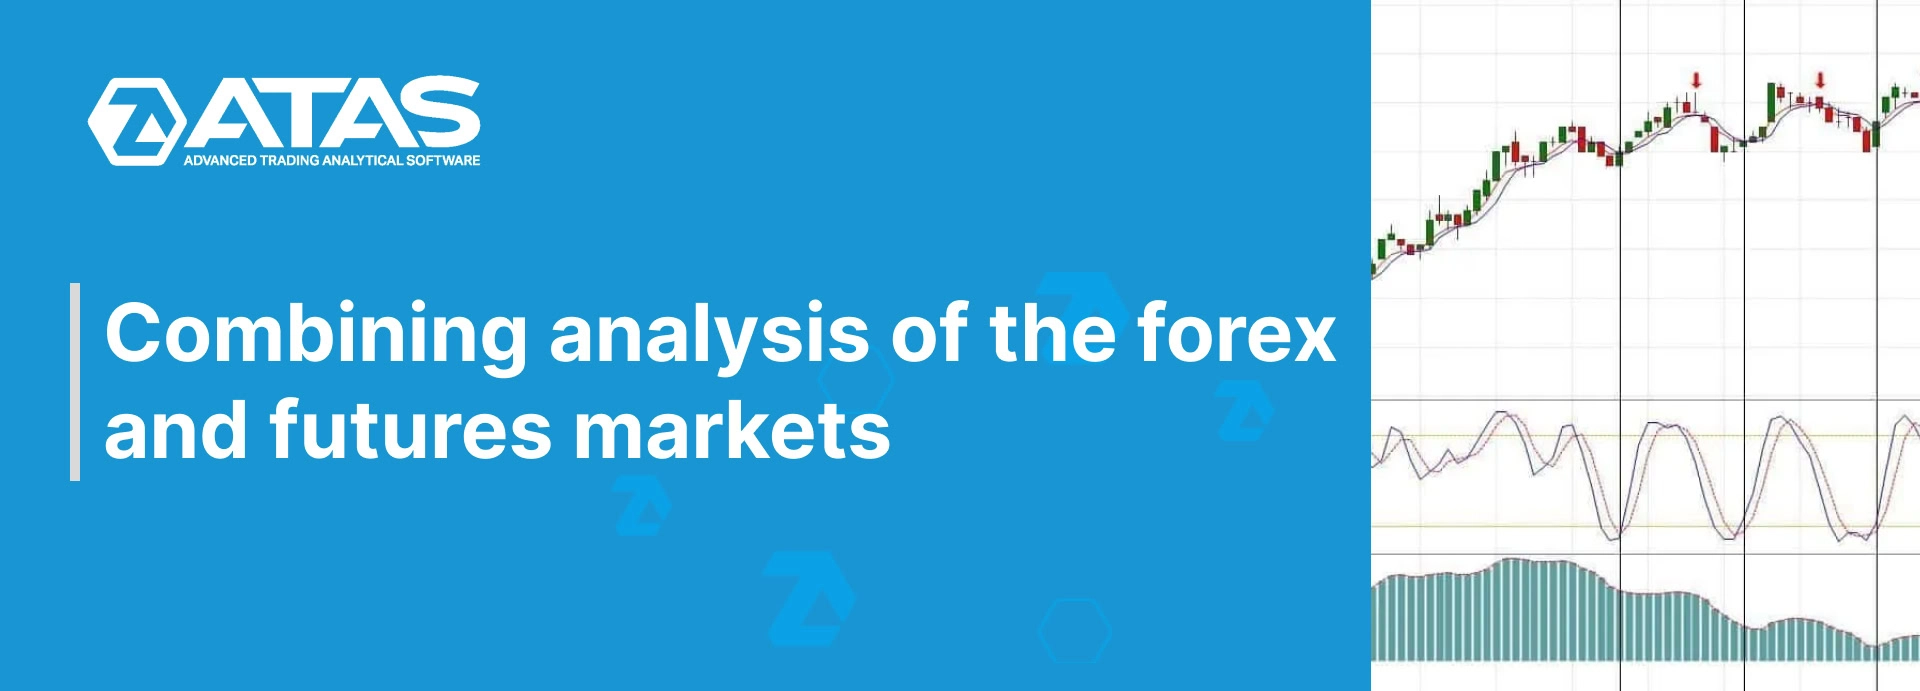 Combining analysis of the forex and futures markets